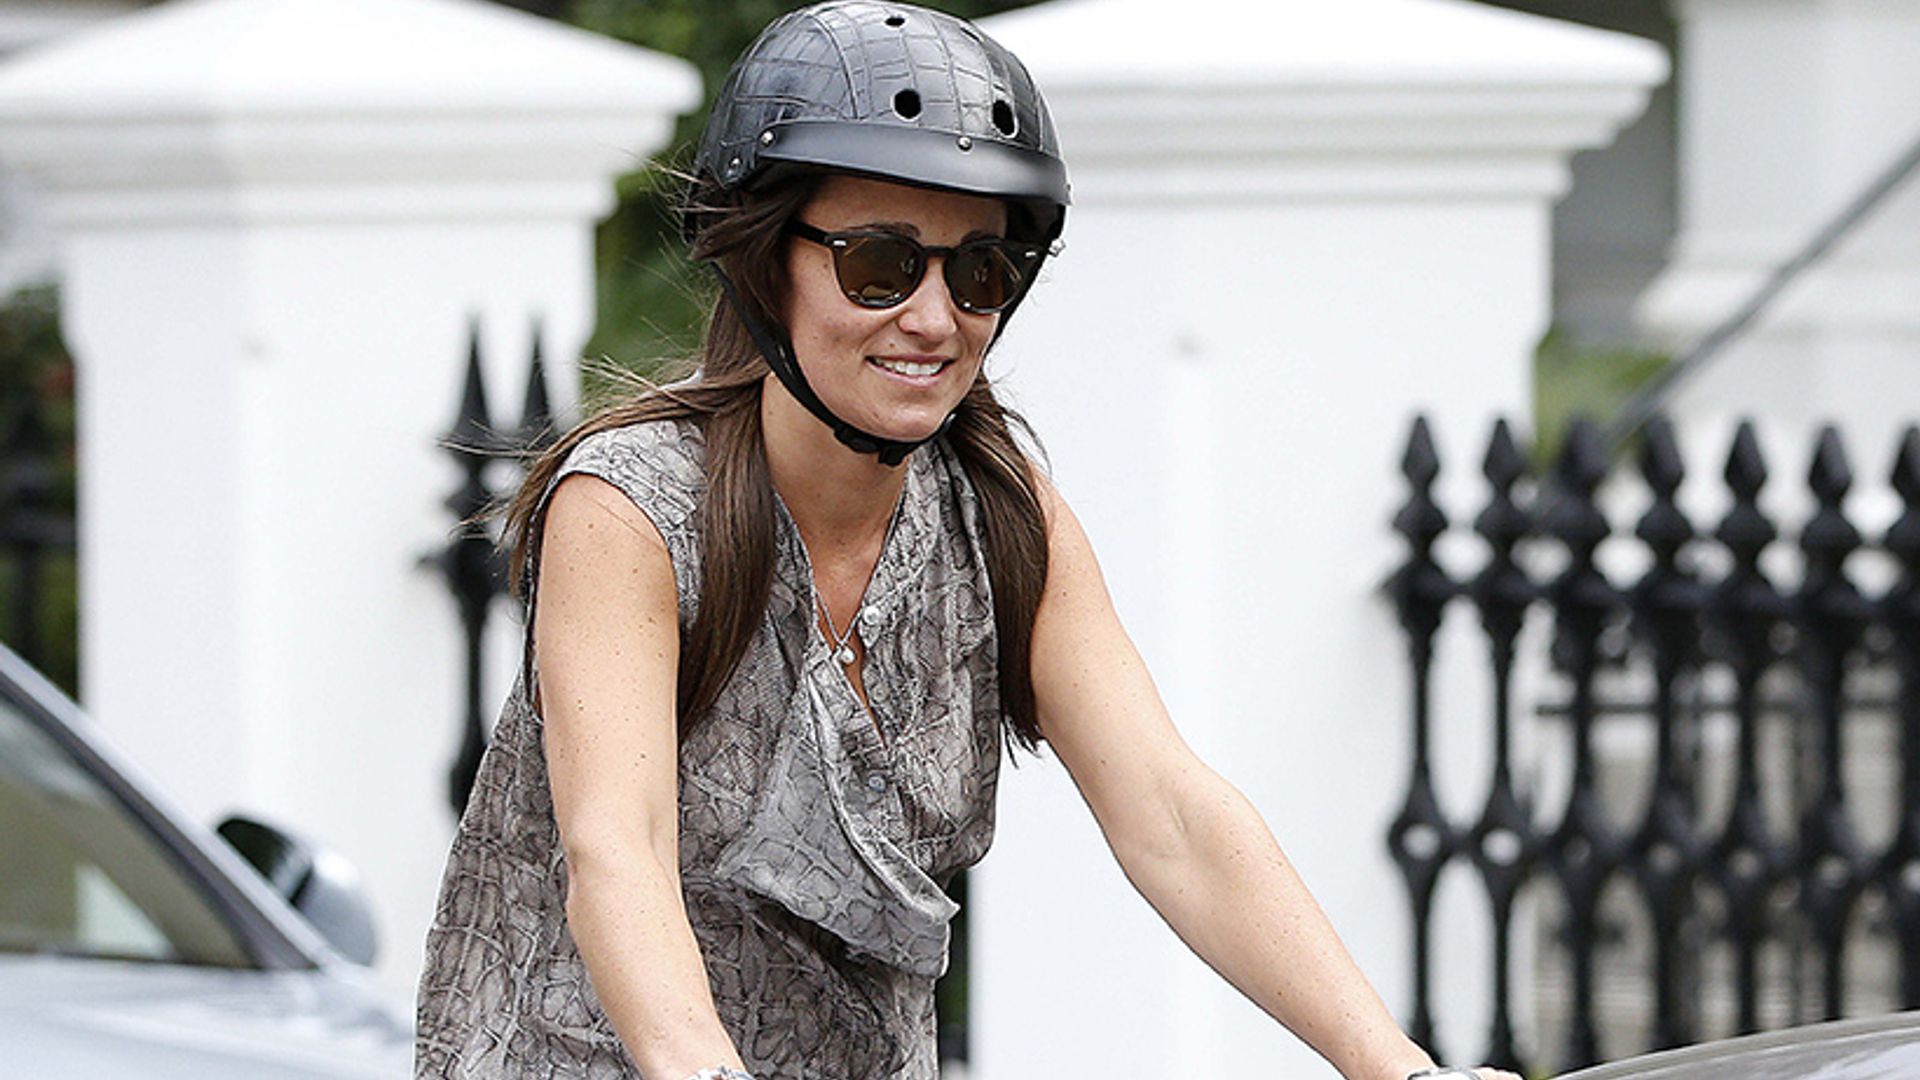 Pippa Middleton is the chicest bike rider in London